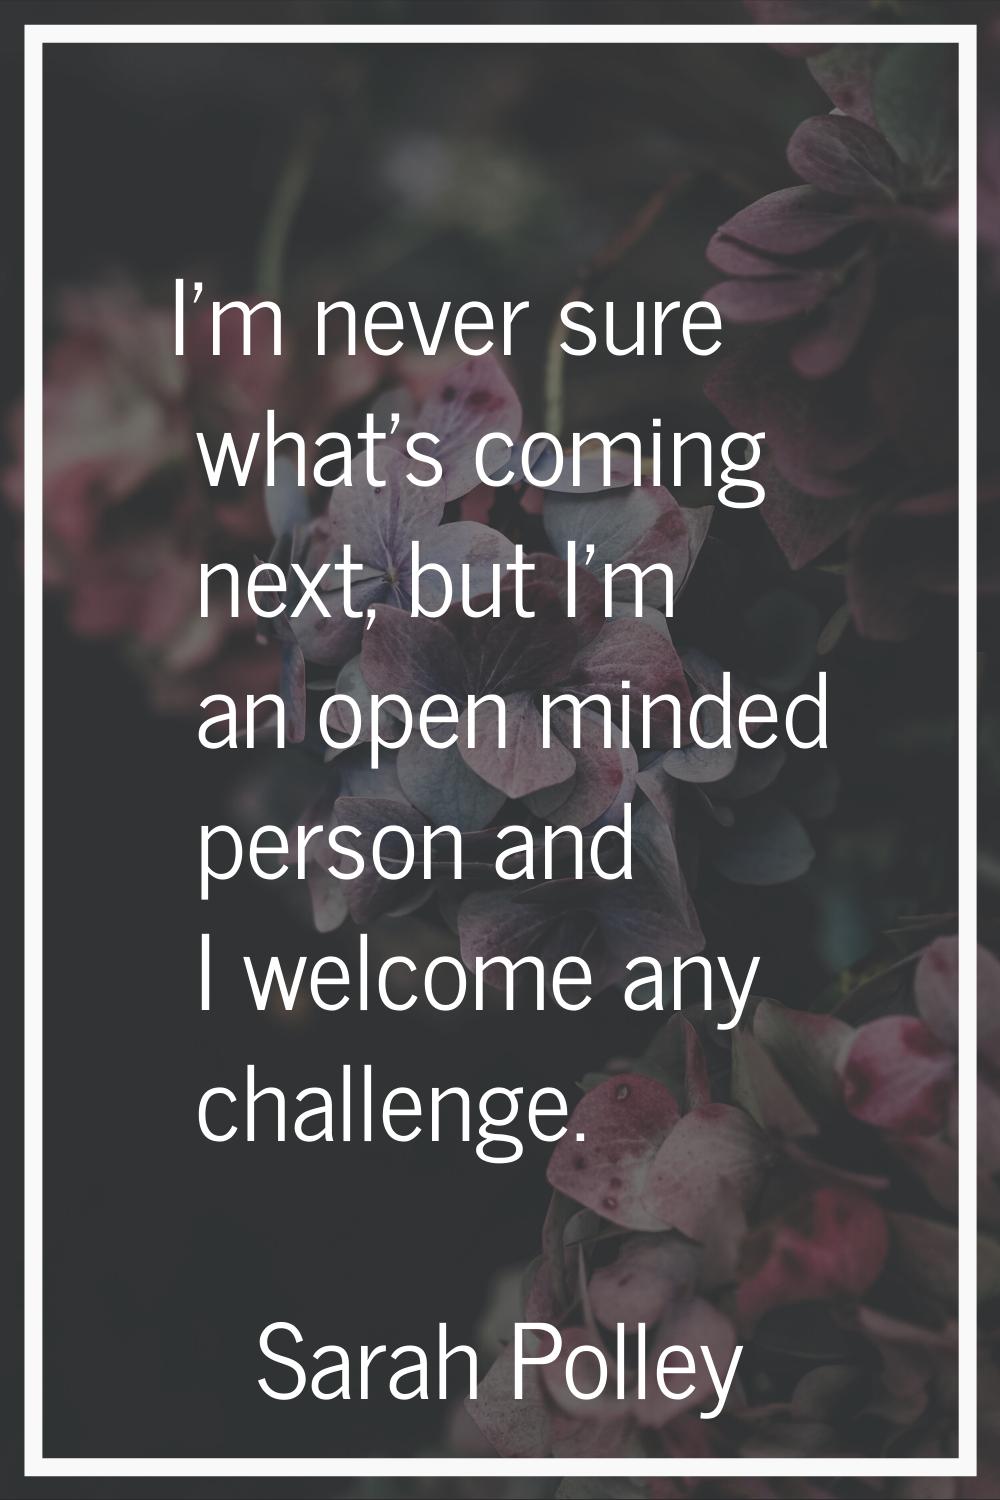 I'm never sure what's coming next, but I'm an open minded person and I welcome any challenge.